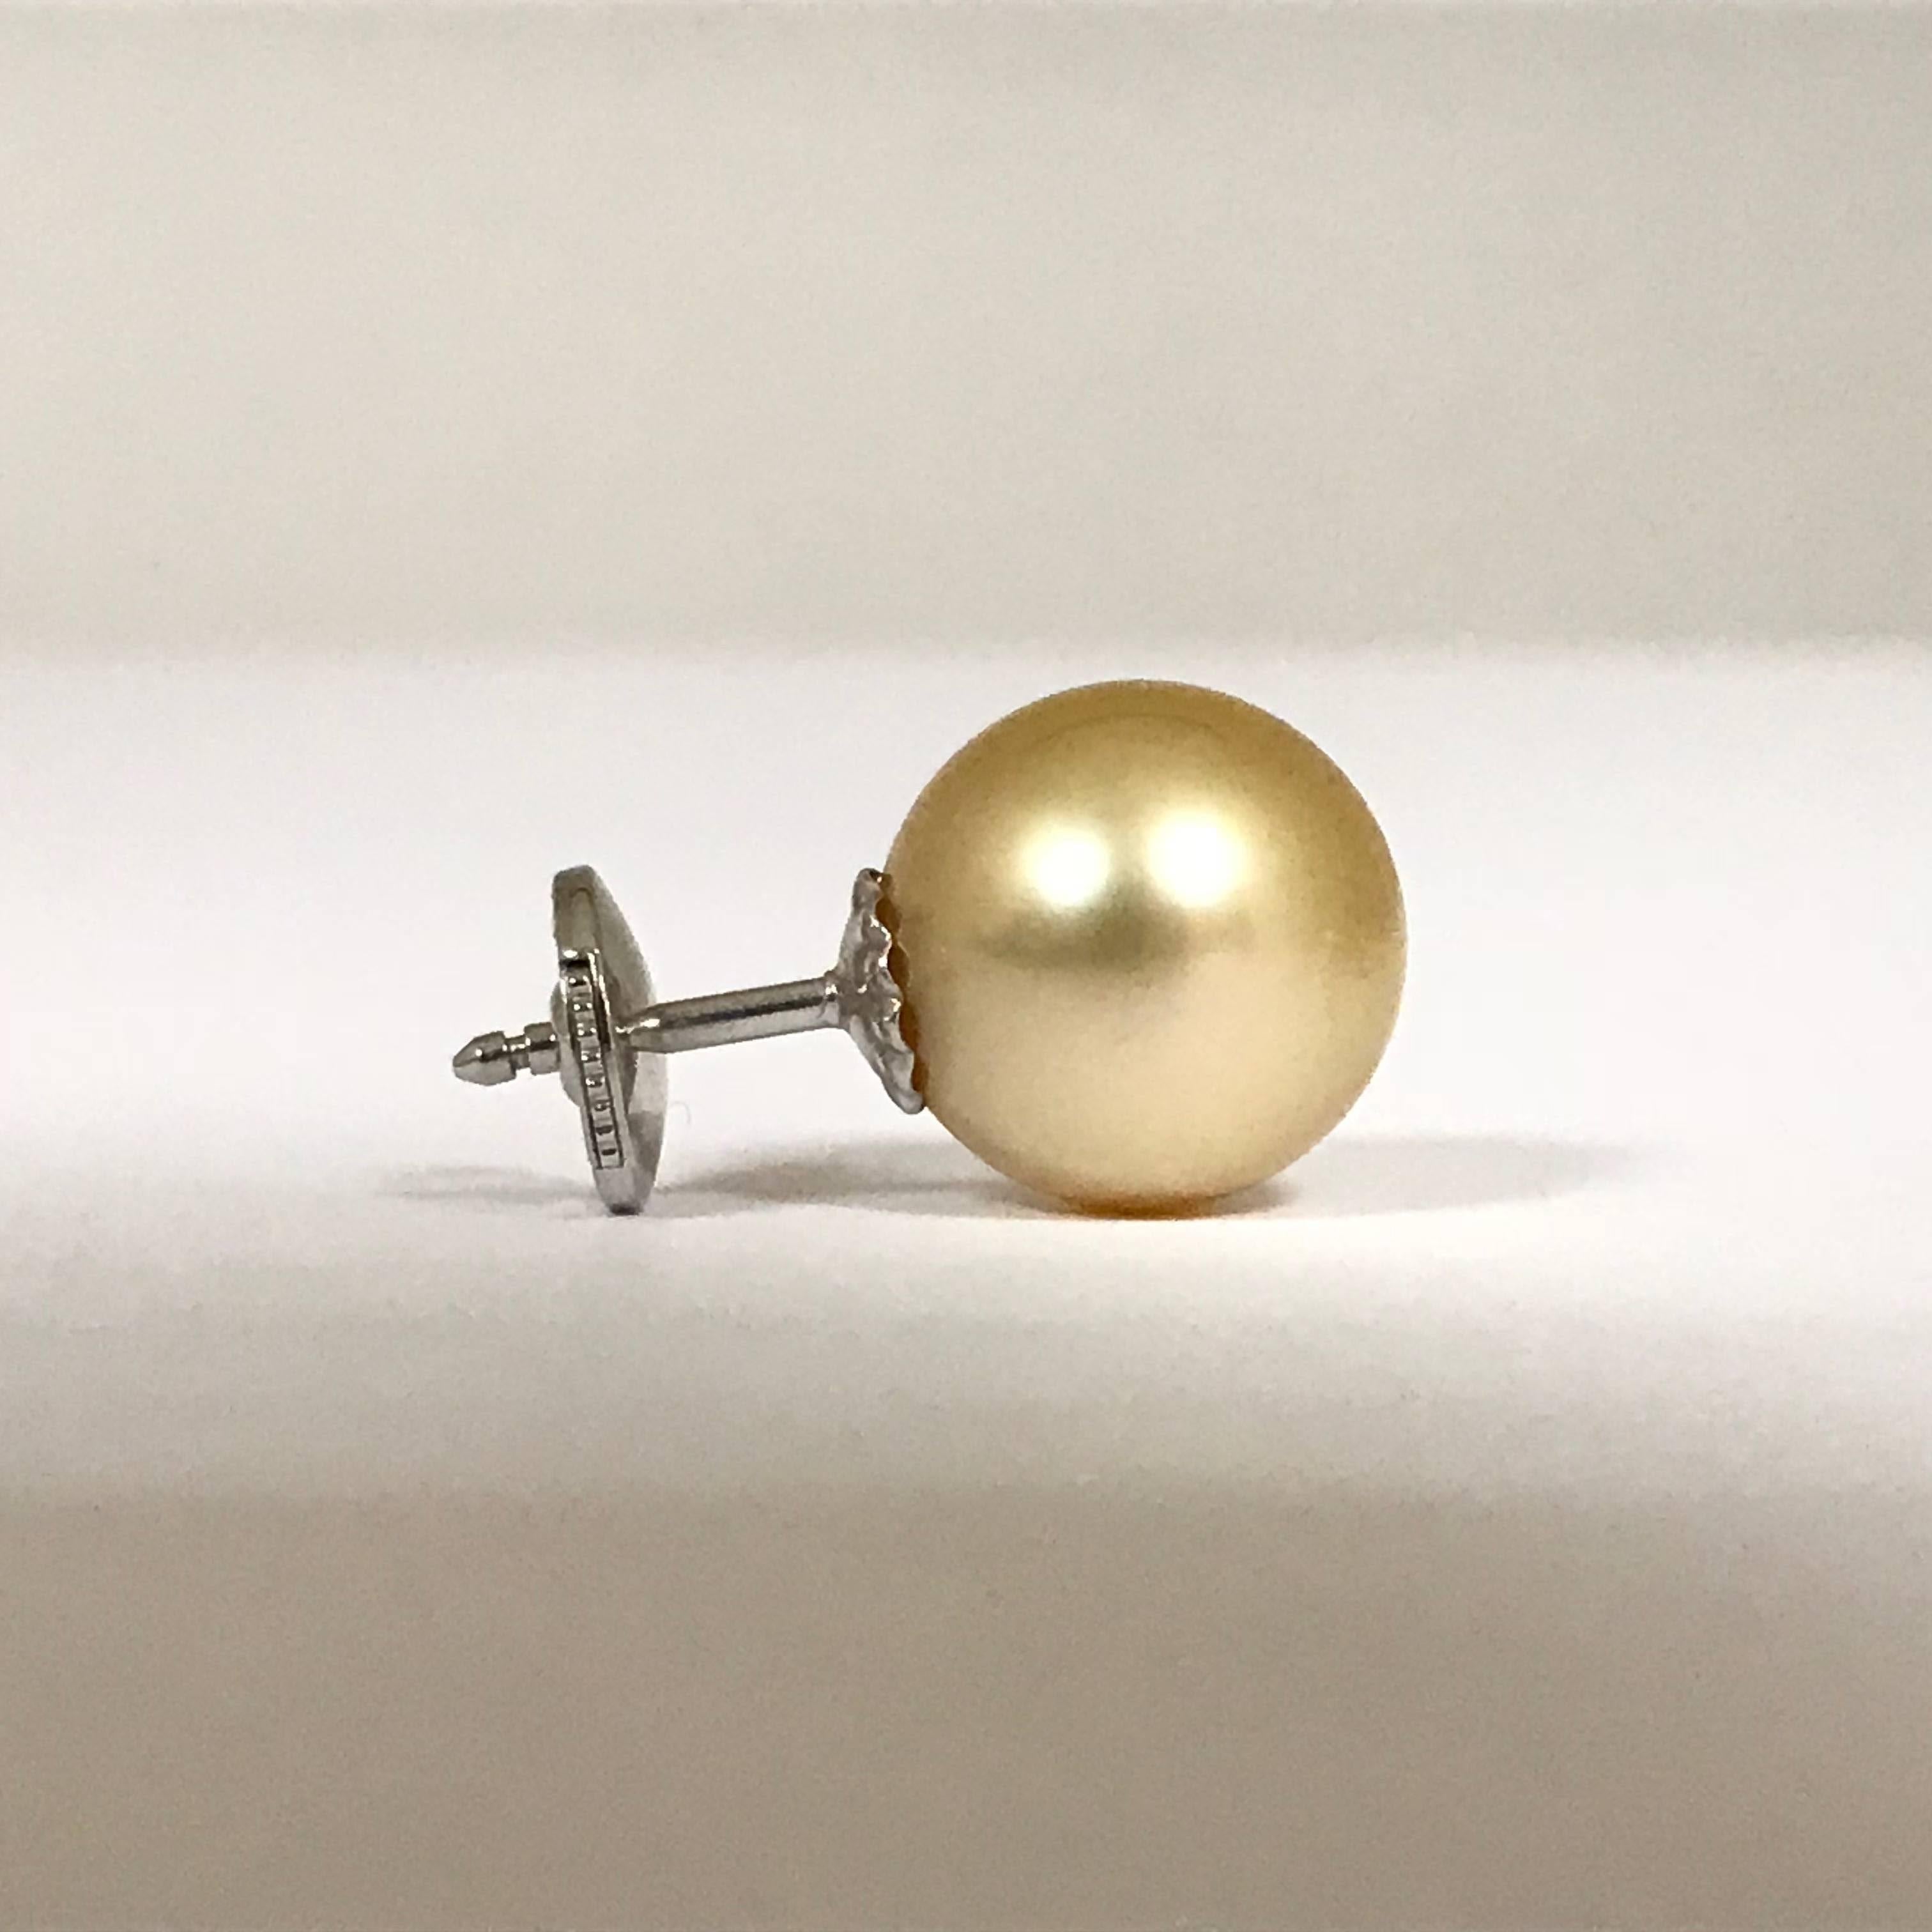 Discover this Champagne Cultured Pearl and White Gold Earrings.
Champagne Cultured Pearl 10.5/11
White Gold 18 Carat